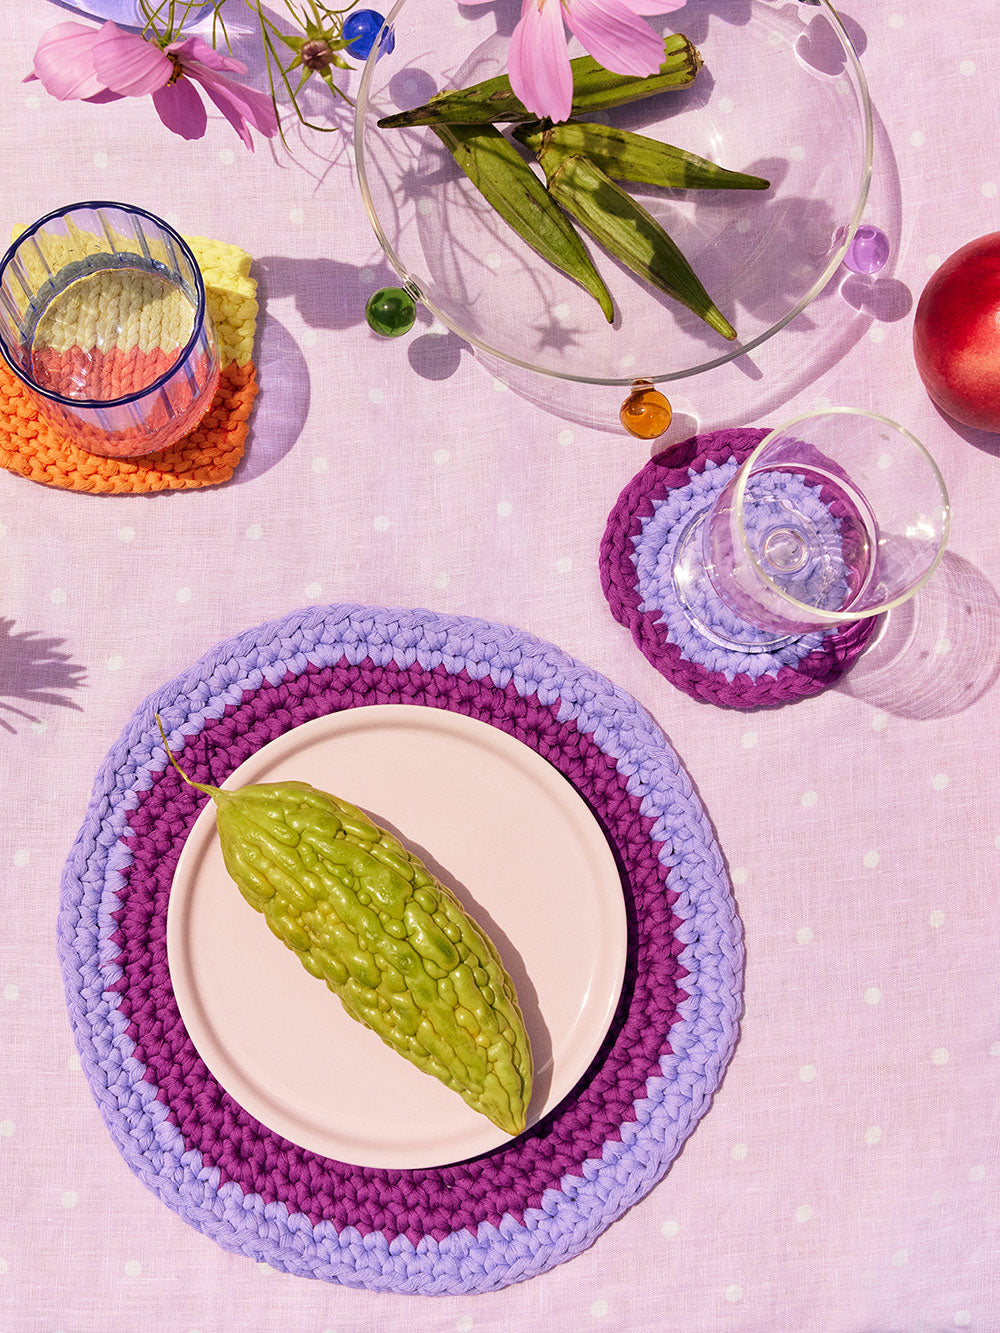 Isla plum and lilac circular crochet placemats and coasters styled on a table with vegetables and glassware. 